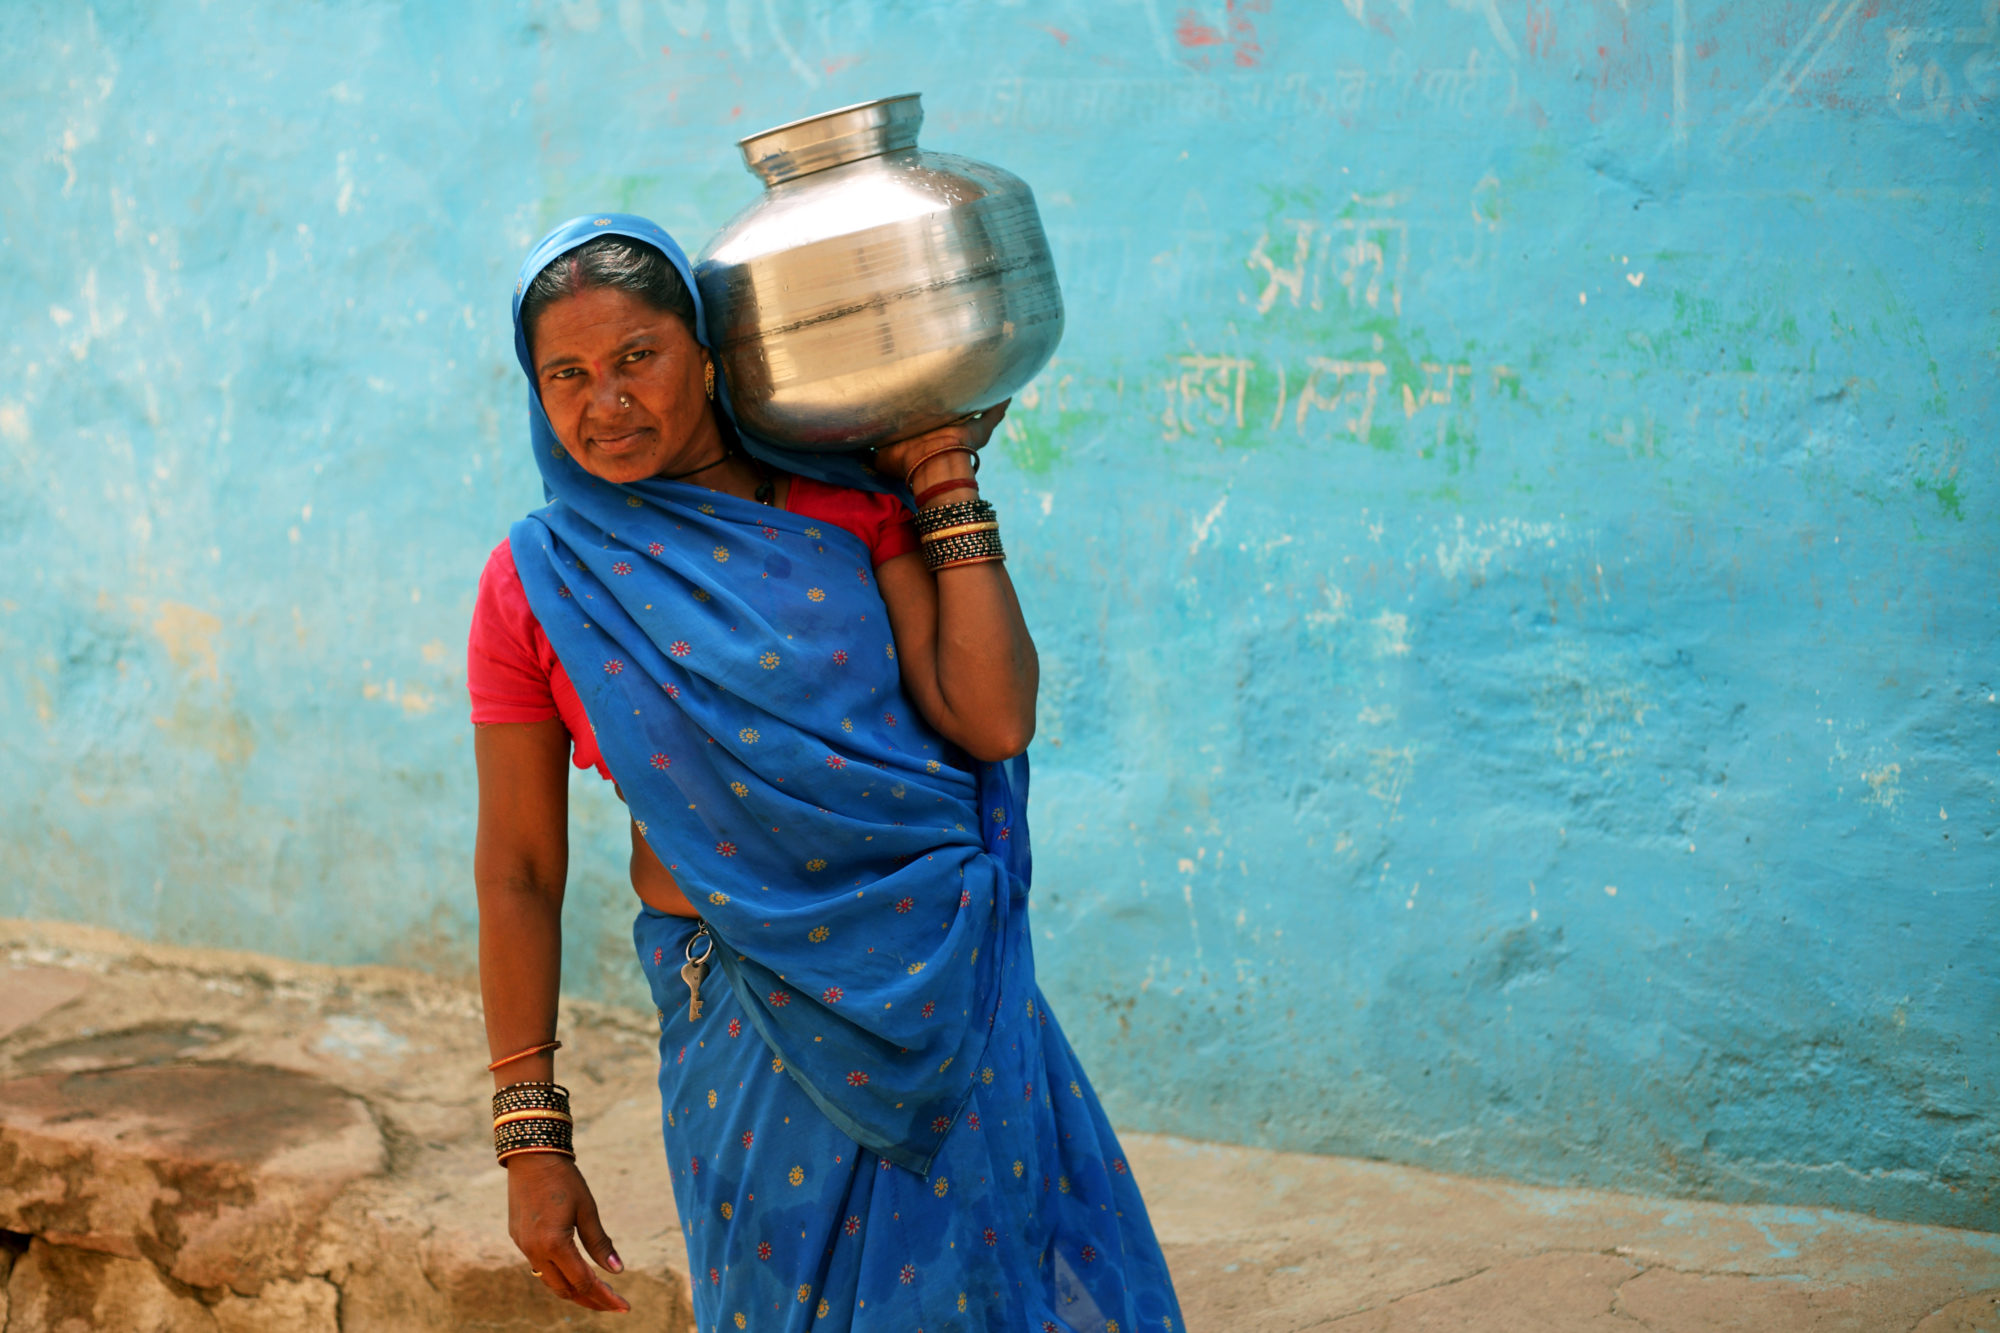 Mana Devi carries drinking water back to her family in Balchour village, India. Photo by Srikanth Kolari/ActionAid.